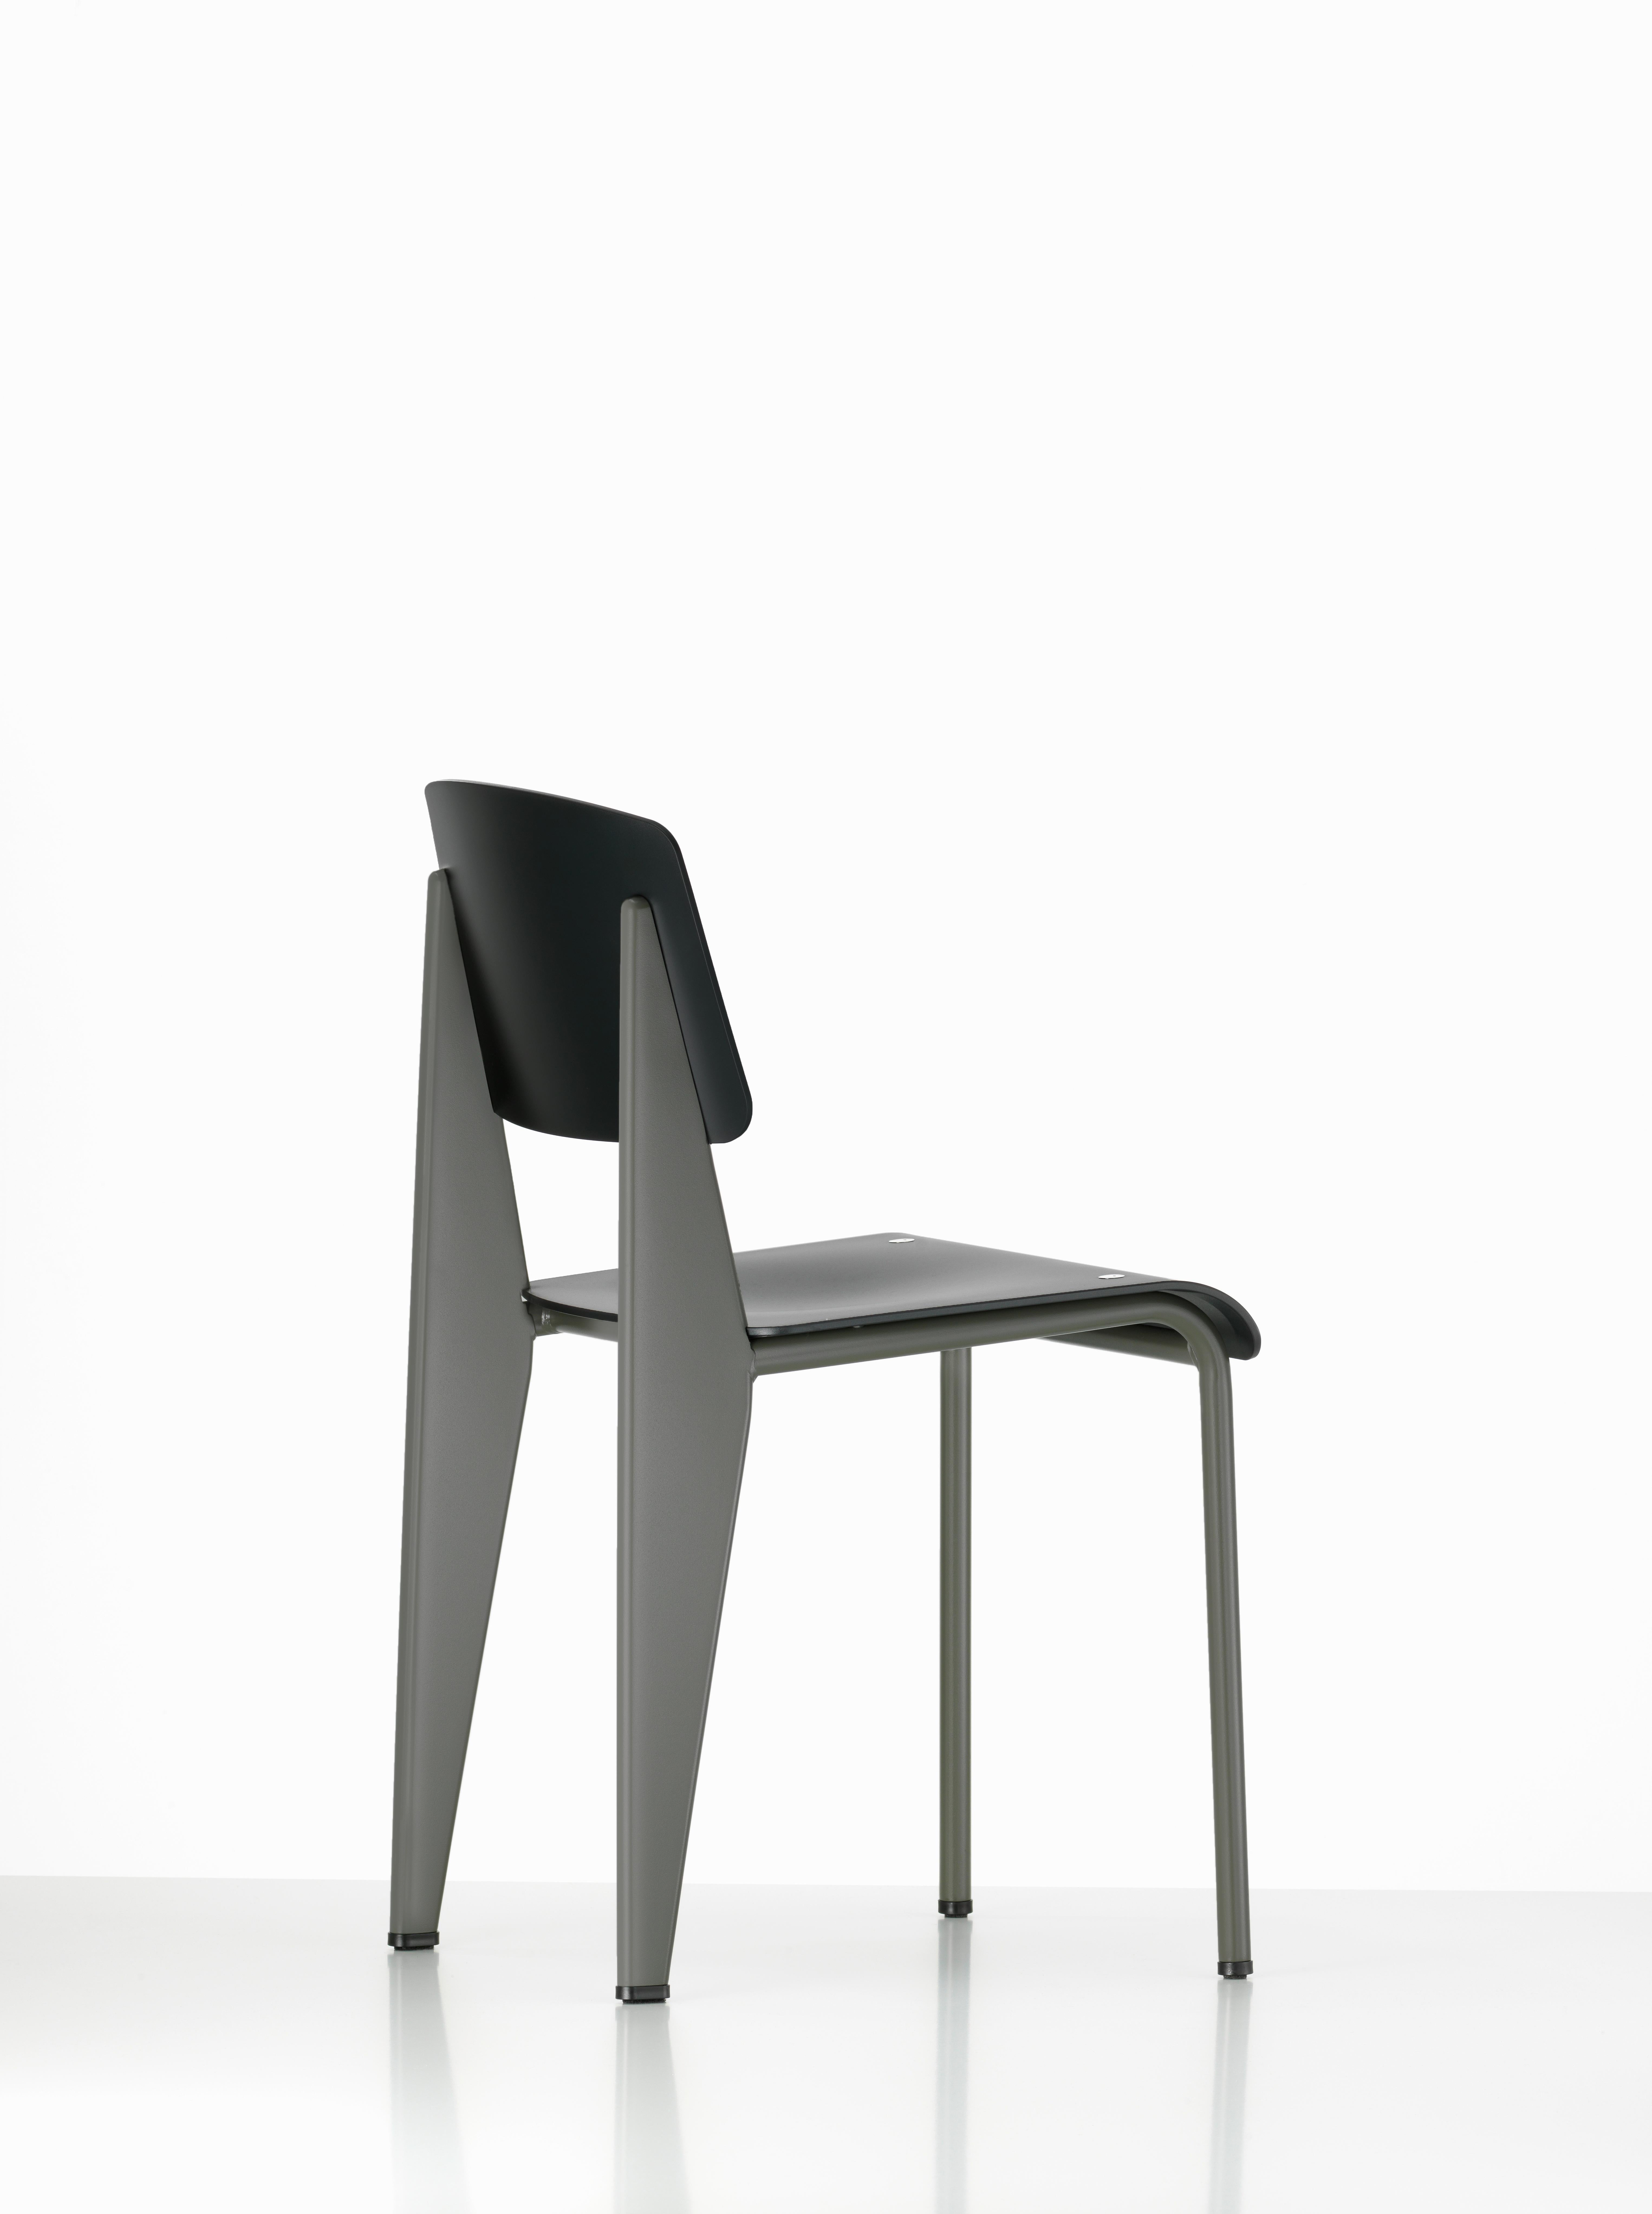 Jean Prouvé Standard Chair SP in Black for Vitra 6